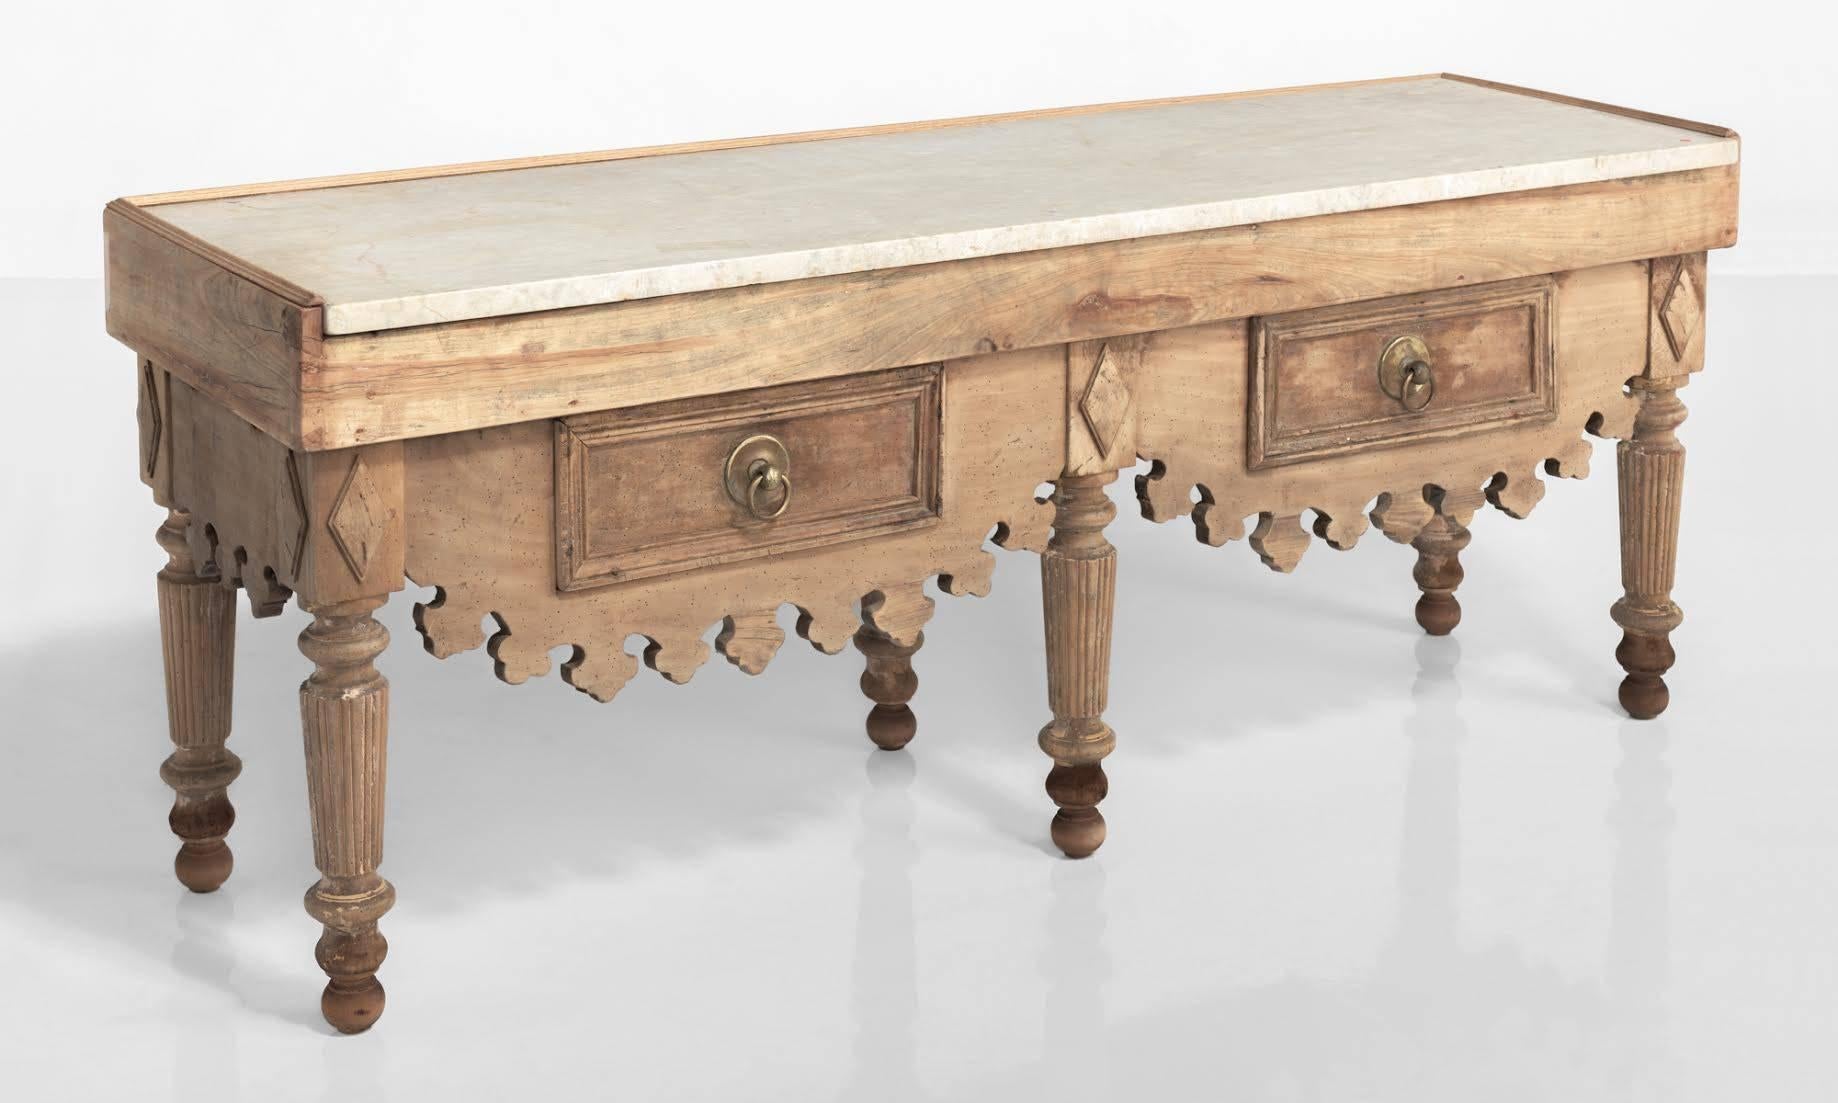 Primitive butcher block table, Spain, circa 1890

Massive form with inset marble top, generous storage, brass hardware, and an ornately carved apron.

Measures: 79